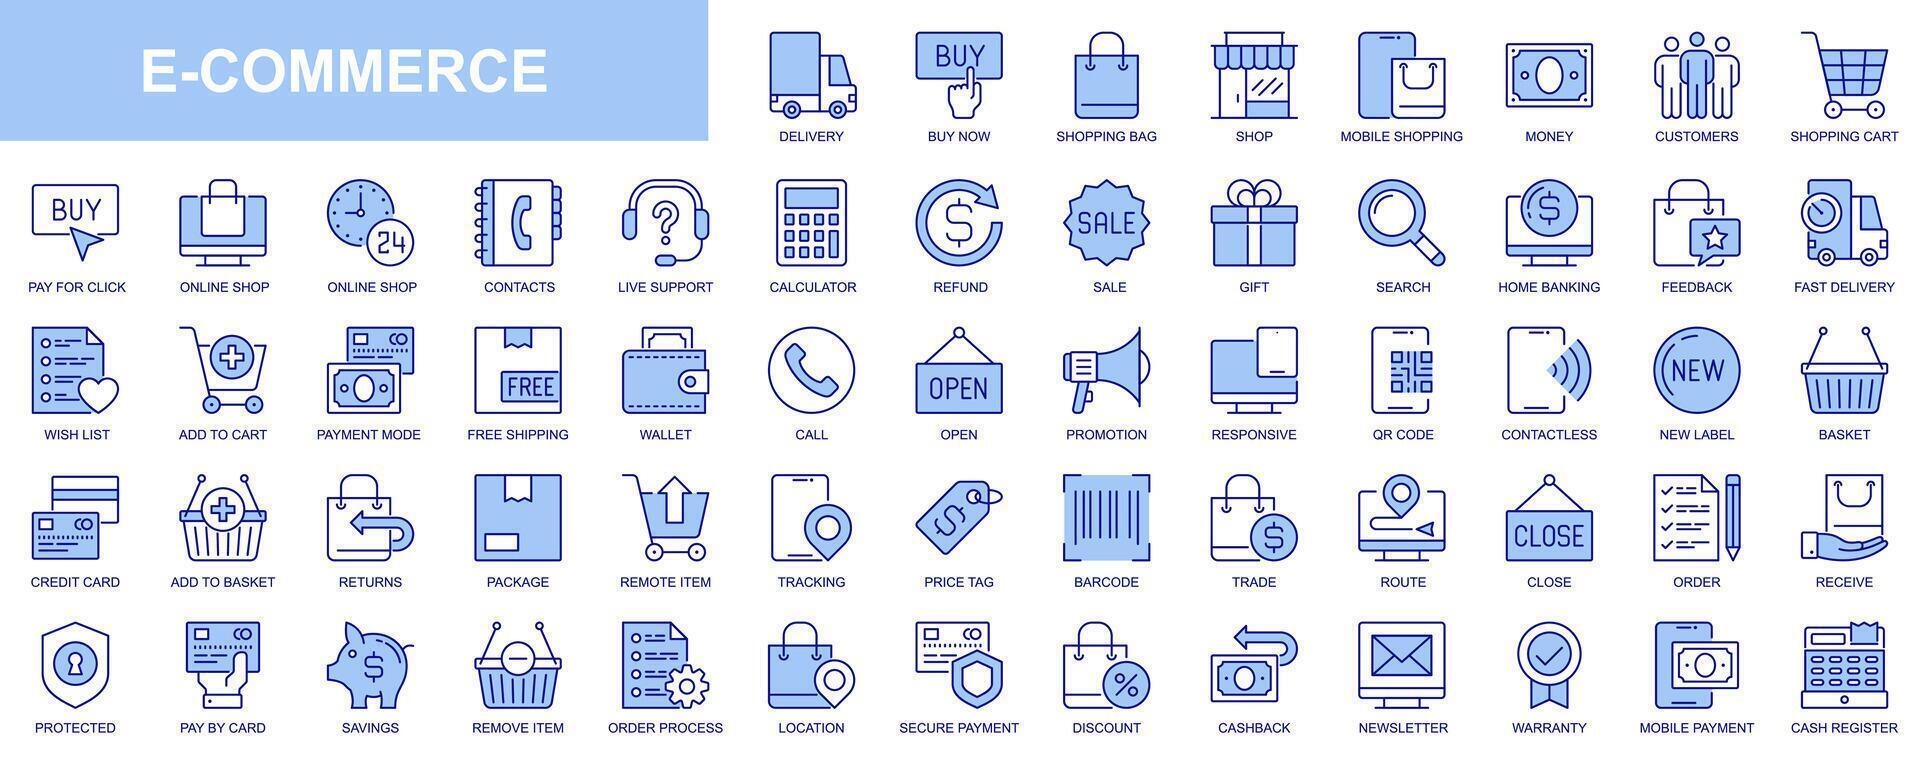 E-commerce web icons set in blue line design. Pack of mobile shopping, delivery, payment, feedback, add to cart, wish list, refund, sales, tracking package and other. Vector outline stroke pictograms